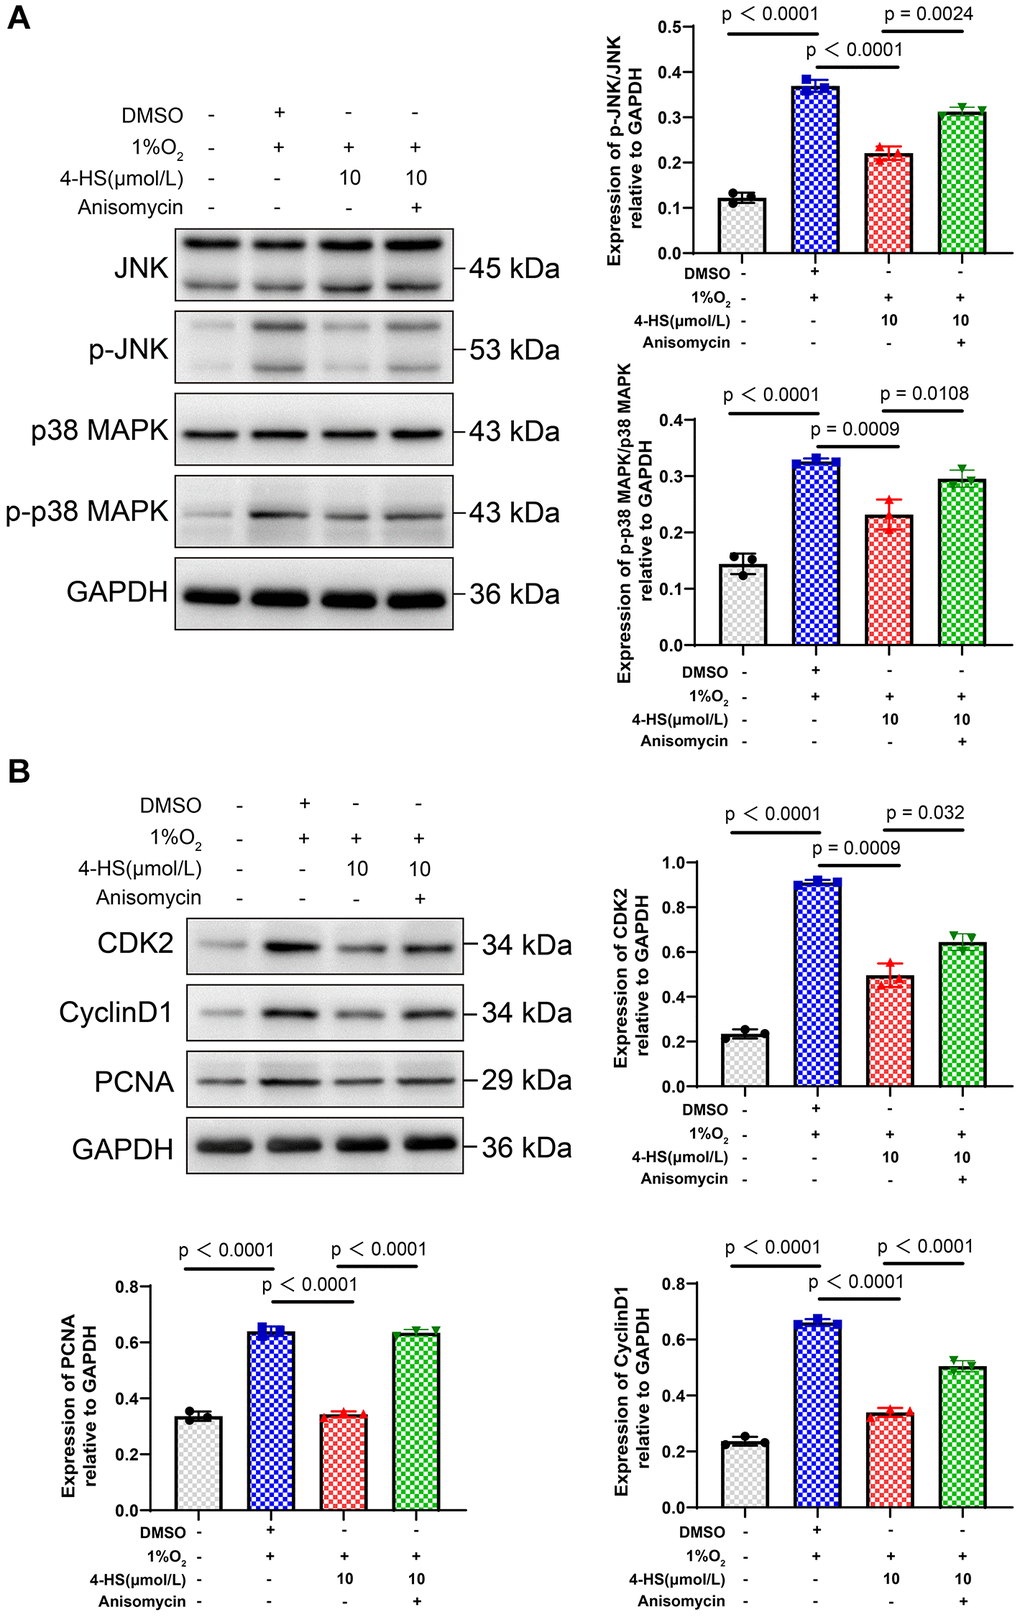 4-HS expression of JNK/MANK signaling pathway and proliferation-related proteins. (A) Western blot assay to detect the changes in the expression of JNK, p-JNK, p38 MAPK, and p-p38MAPK proteins in PASMC after treatment. (B) Western blot assay to detect the changes in the expression of CDK2, CyclinD1, and PCNA proteins in PASMC after treatment.